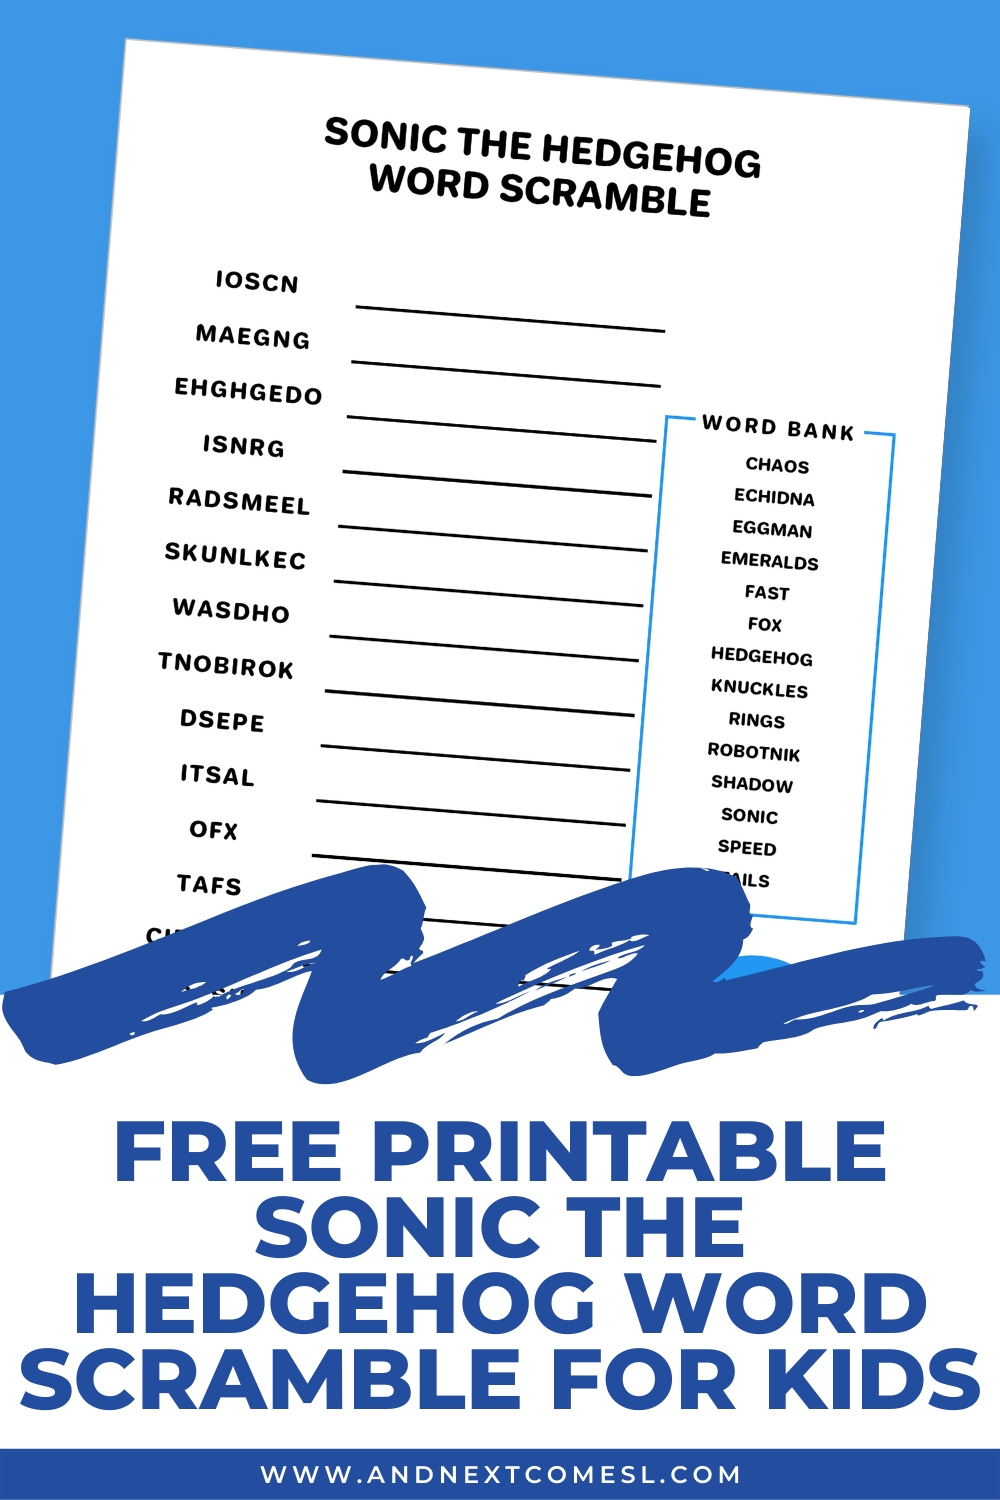 Free Sonic the Hedgehog printable word scramble game for kids with answers